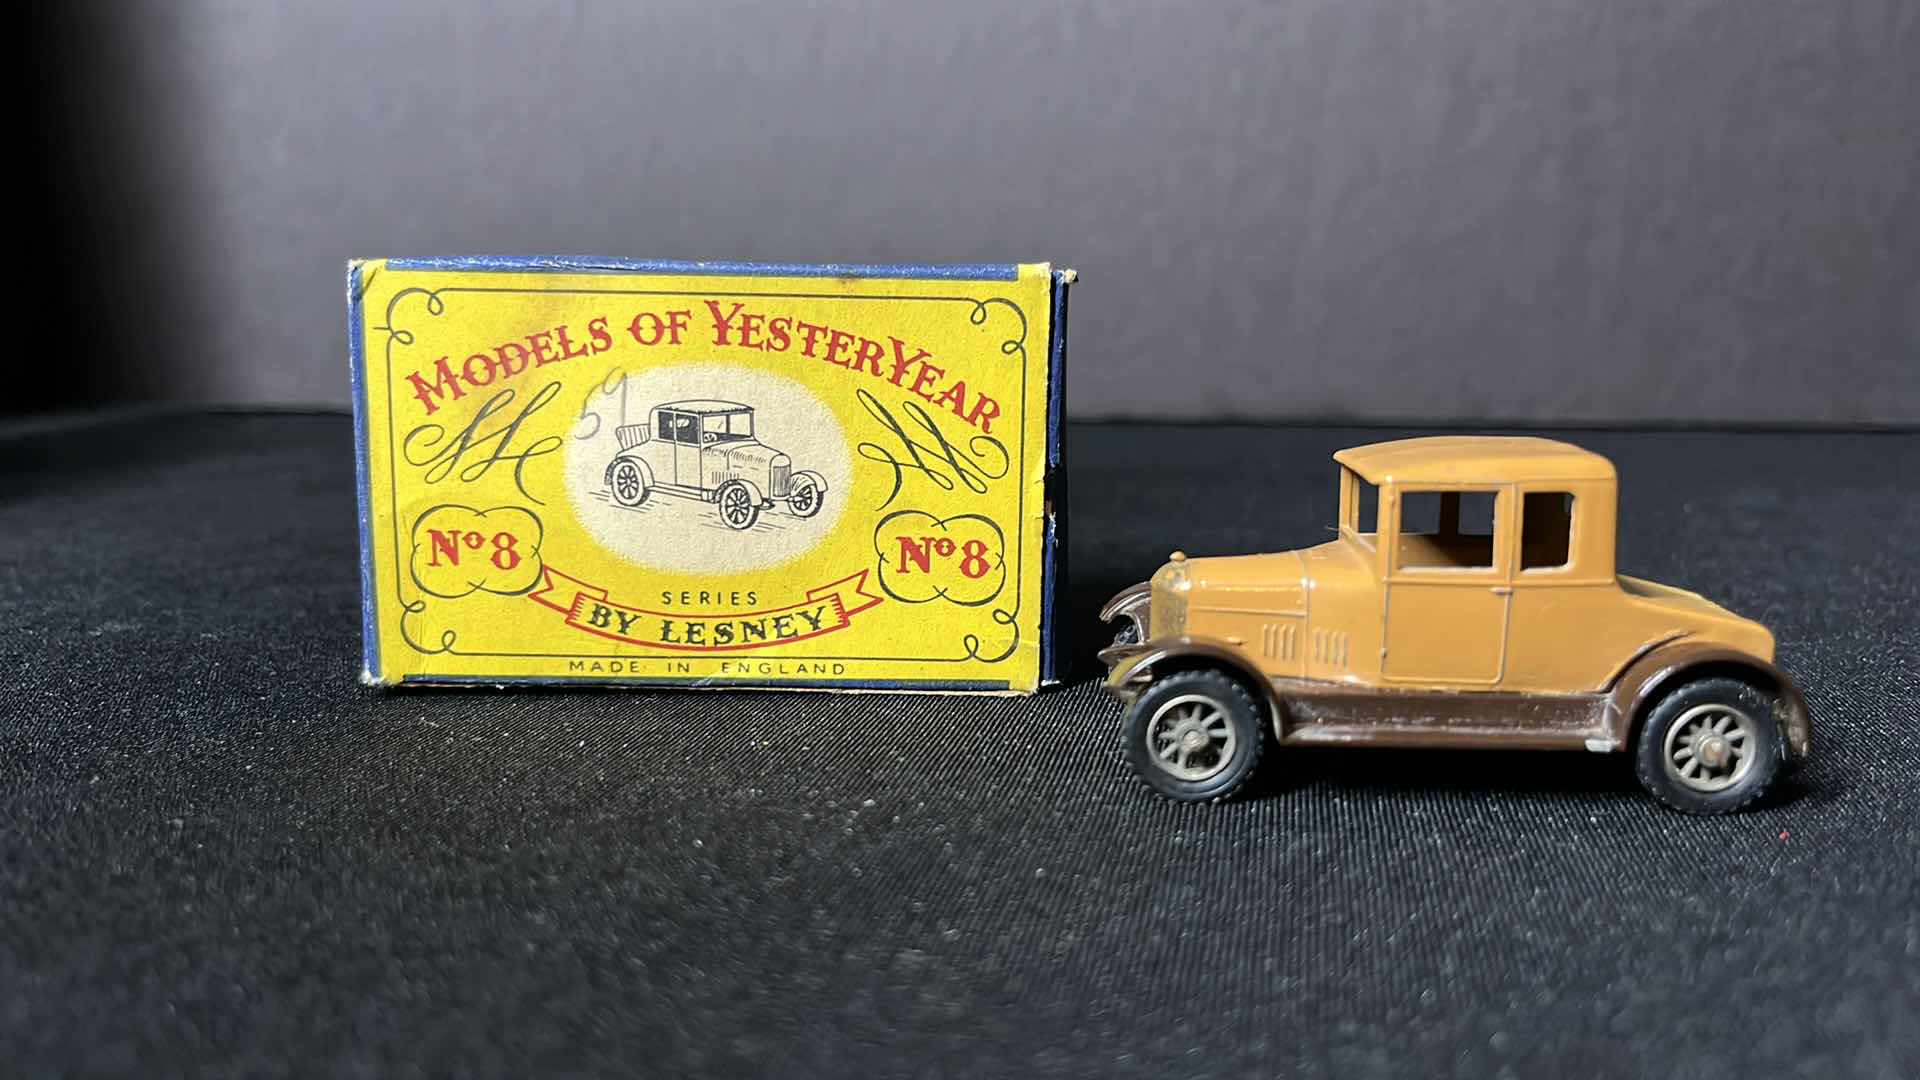 Photo 1 of LESNEY DIE-CAST METAL MODELS OF YESTERYEAR SERIES, NO. 8 SCALE MODEL THE BULLNOSE MORRIS’ COWLEY OF 1926, 1956-1961